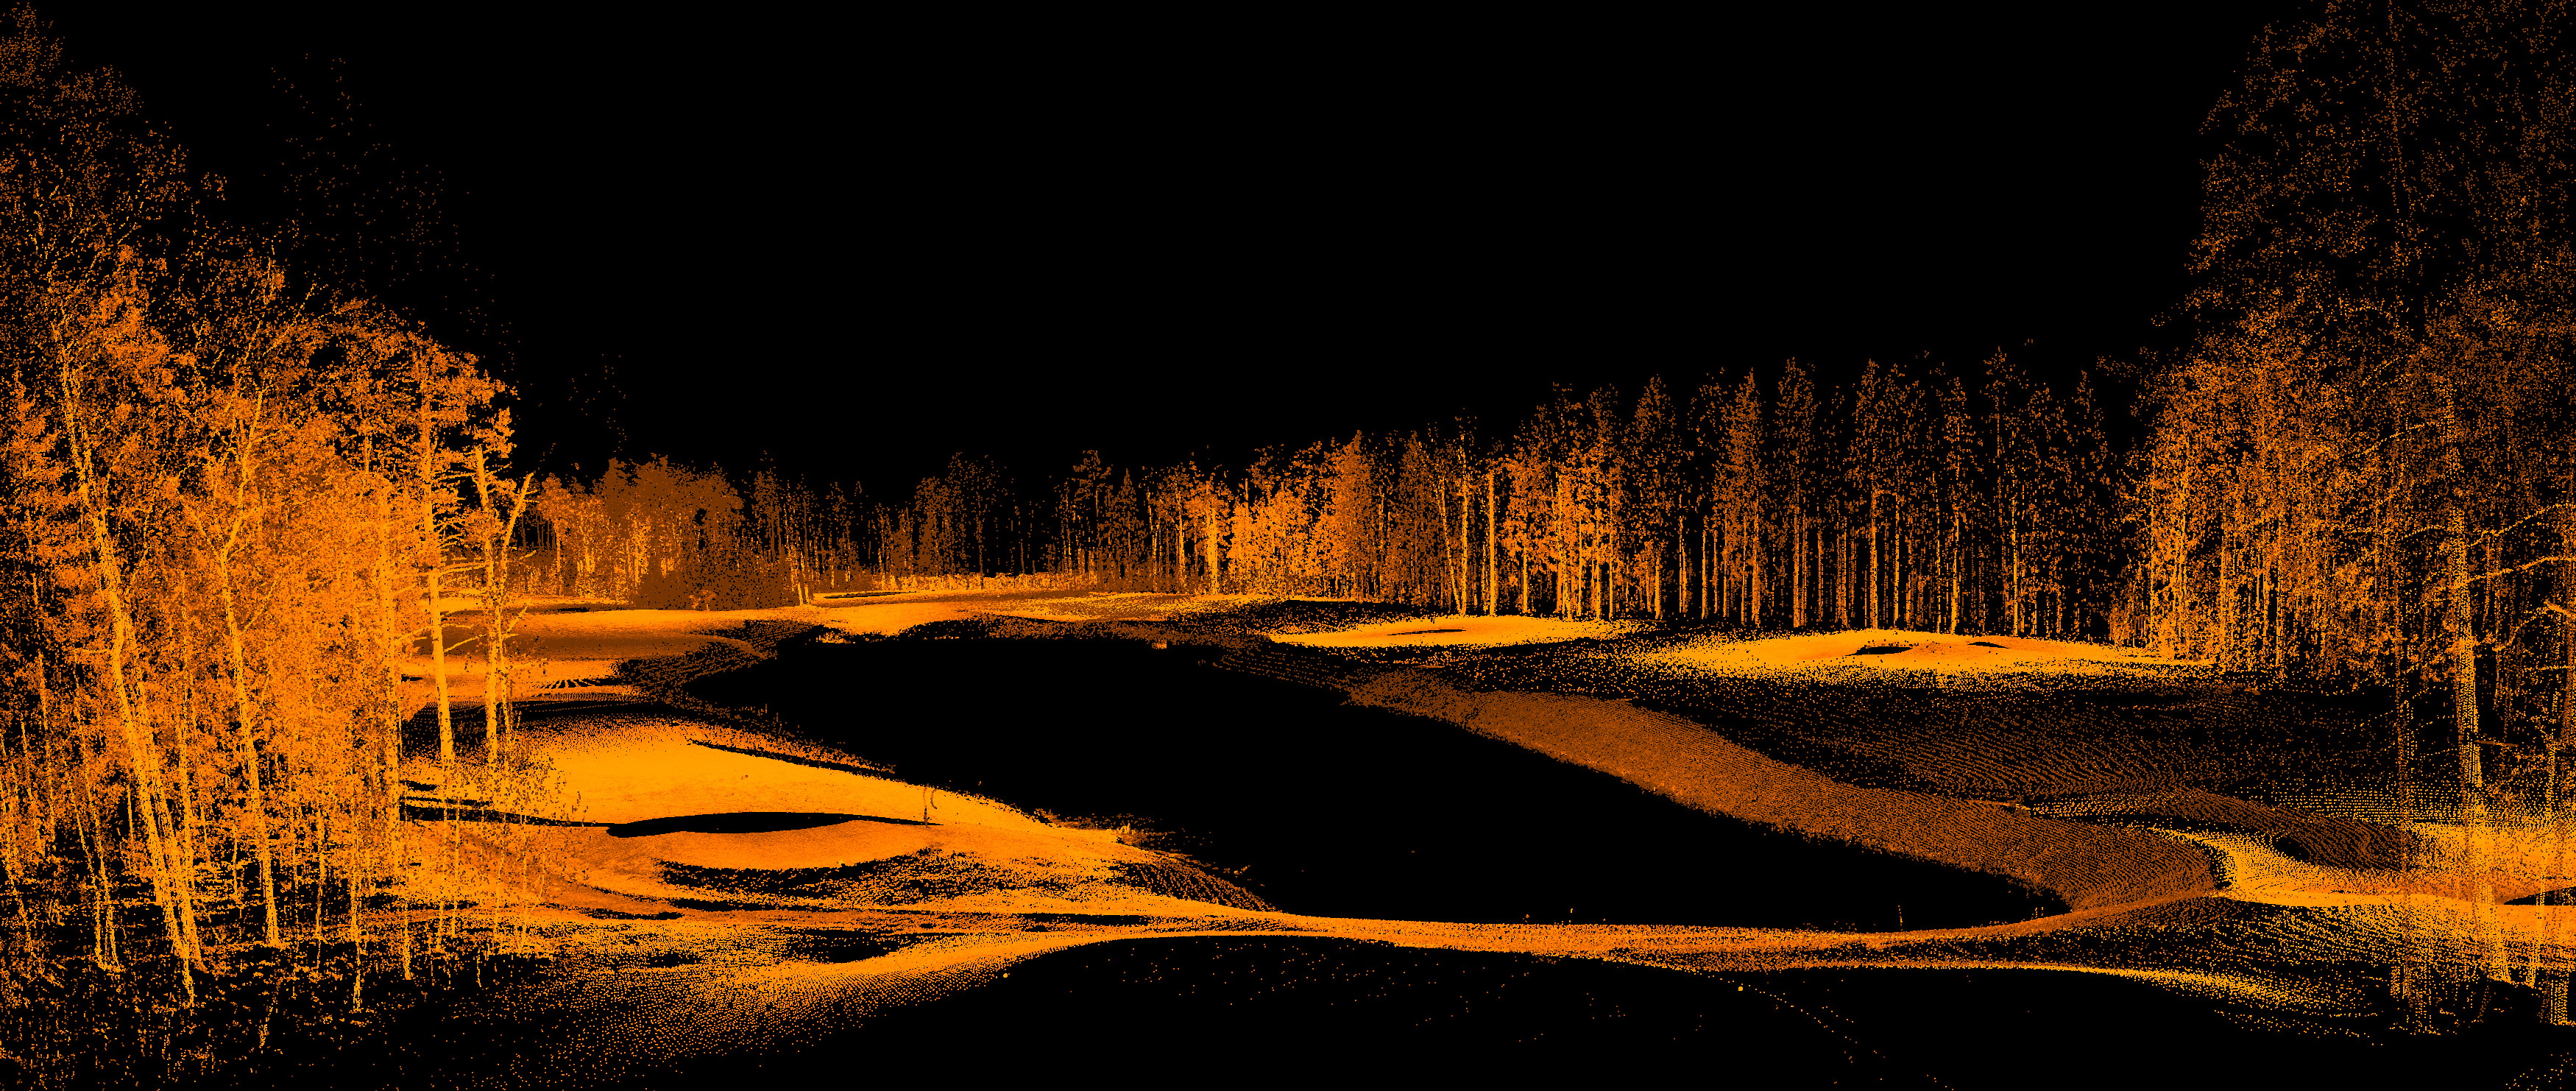 The point cloud of a land surface - the result of laser scanning in land surveying